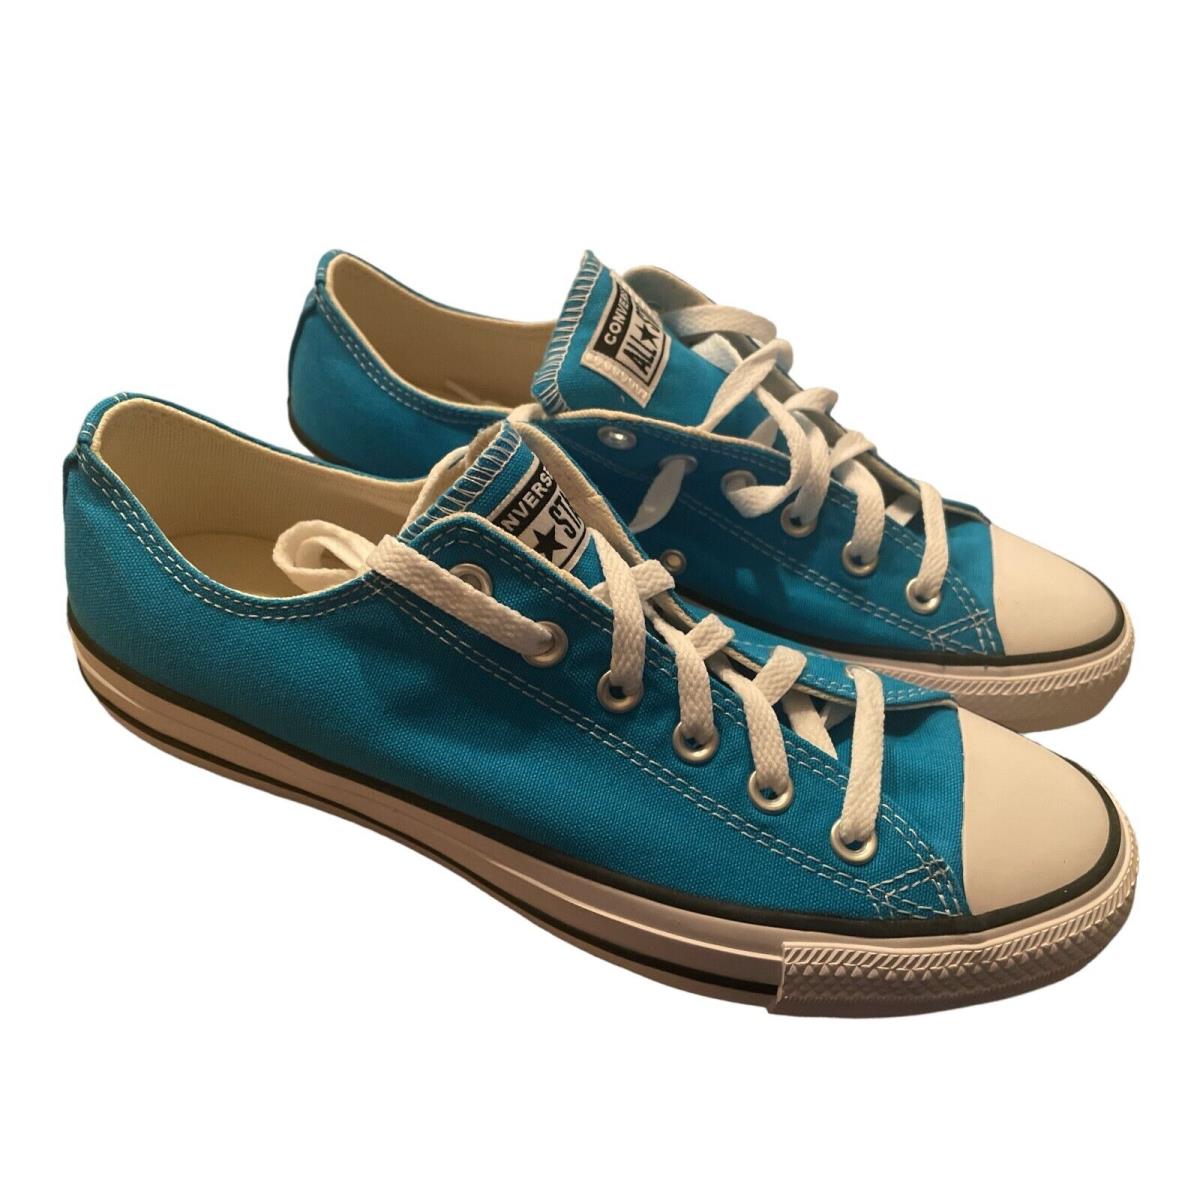 Converse Chuck Taylor All Star OX Sail Blue Shoes 168579F Womens Size 10 Mens 8